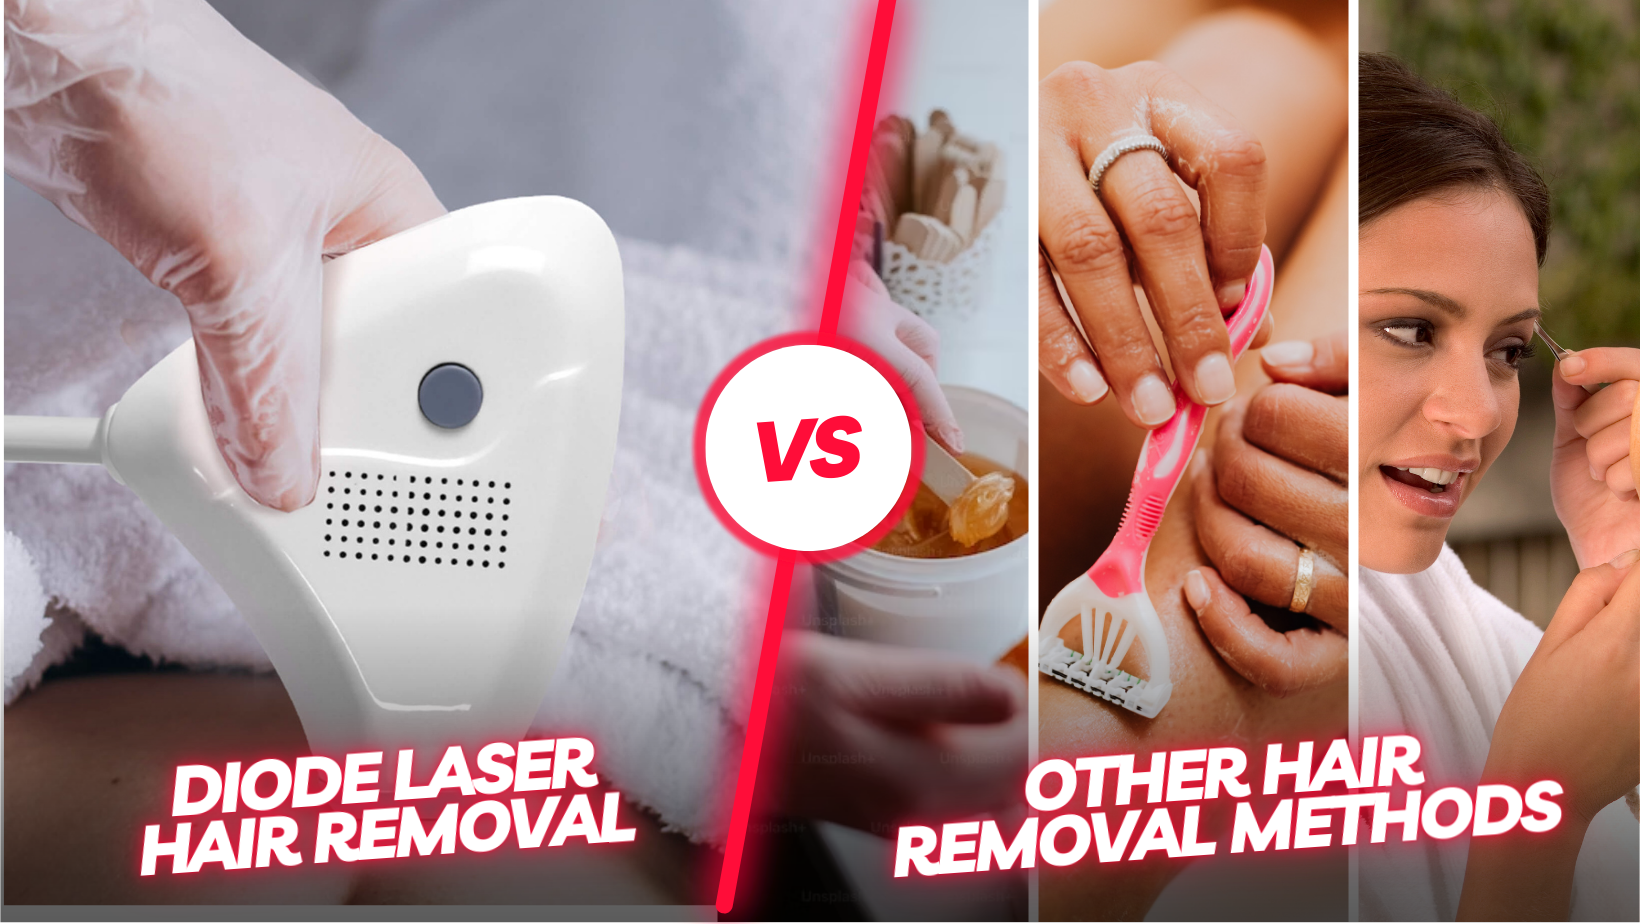 Comparing Diode Laser Hair Removal to Other Hair Removal Methods